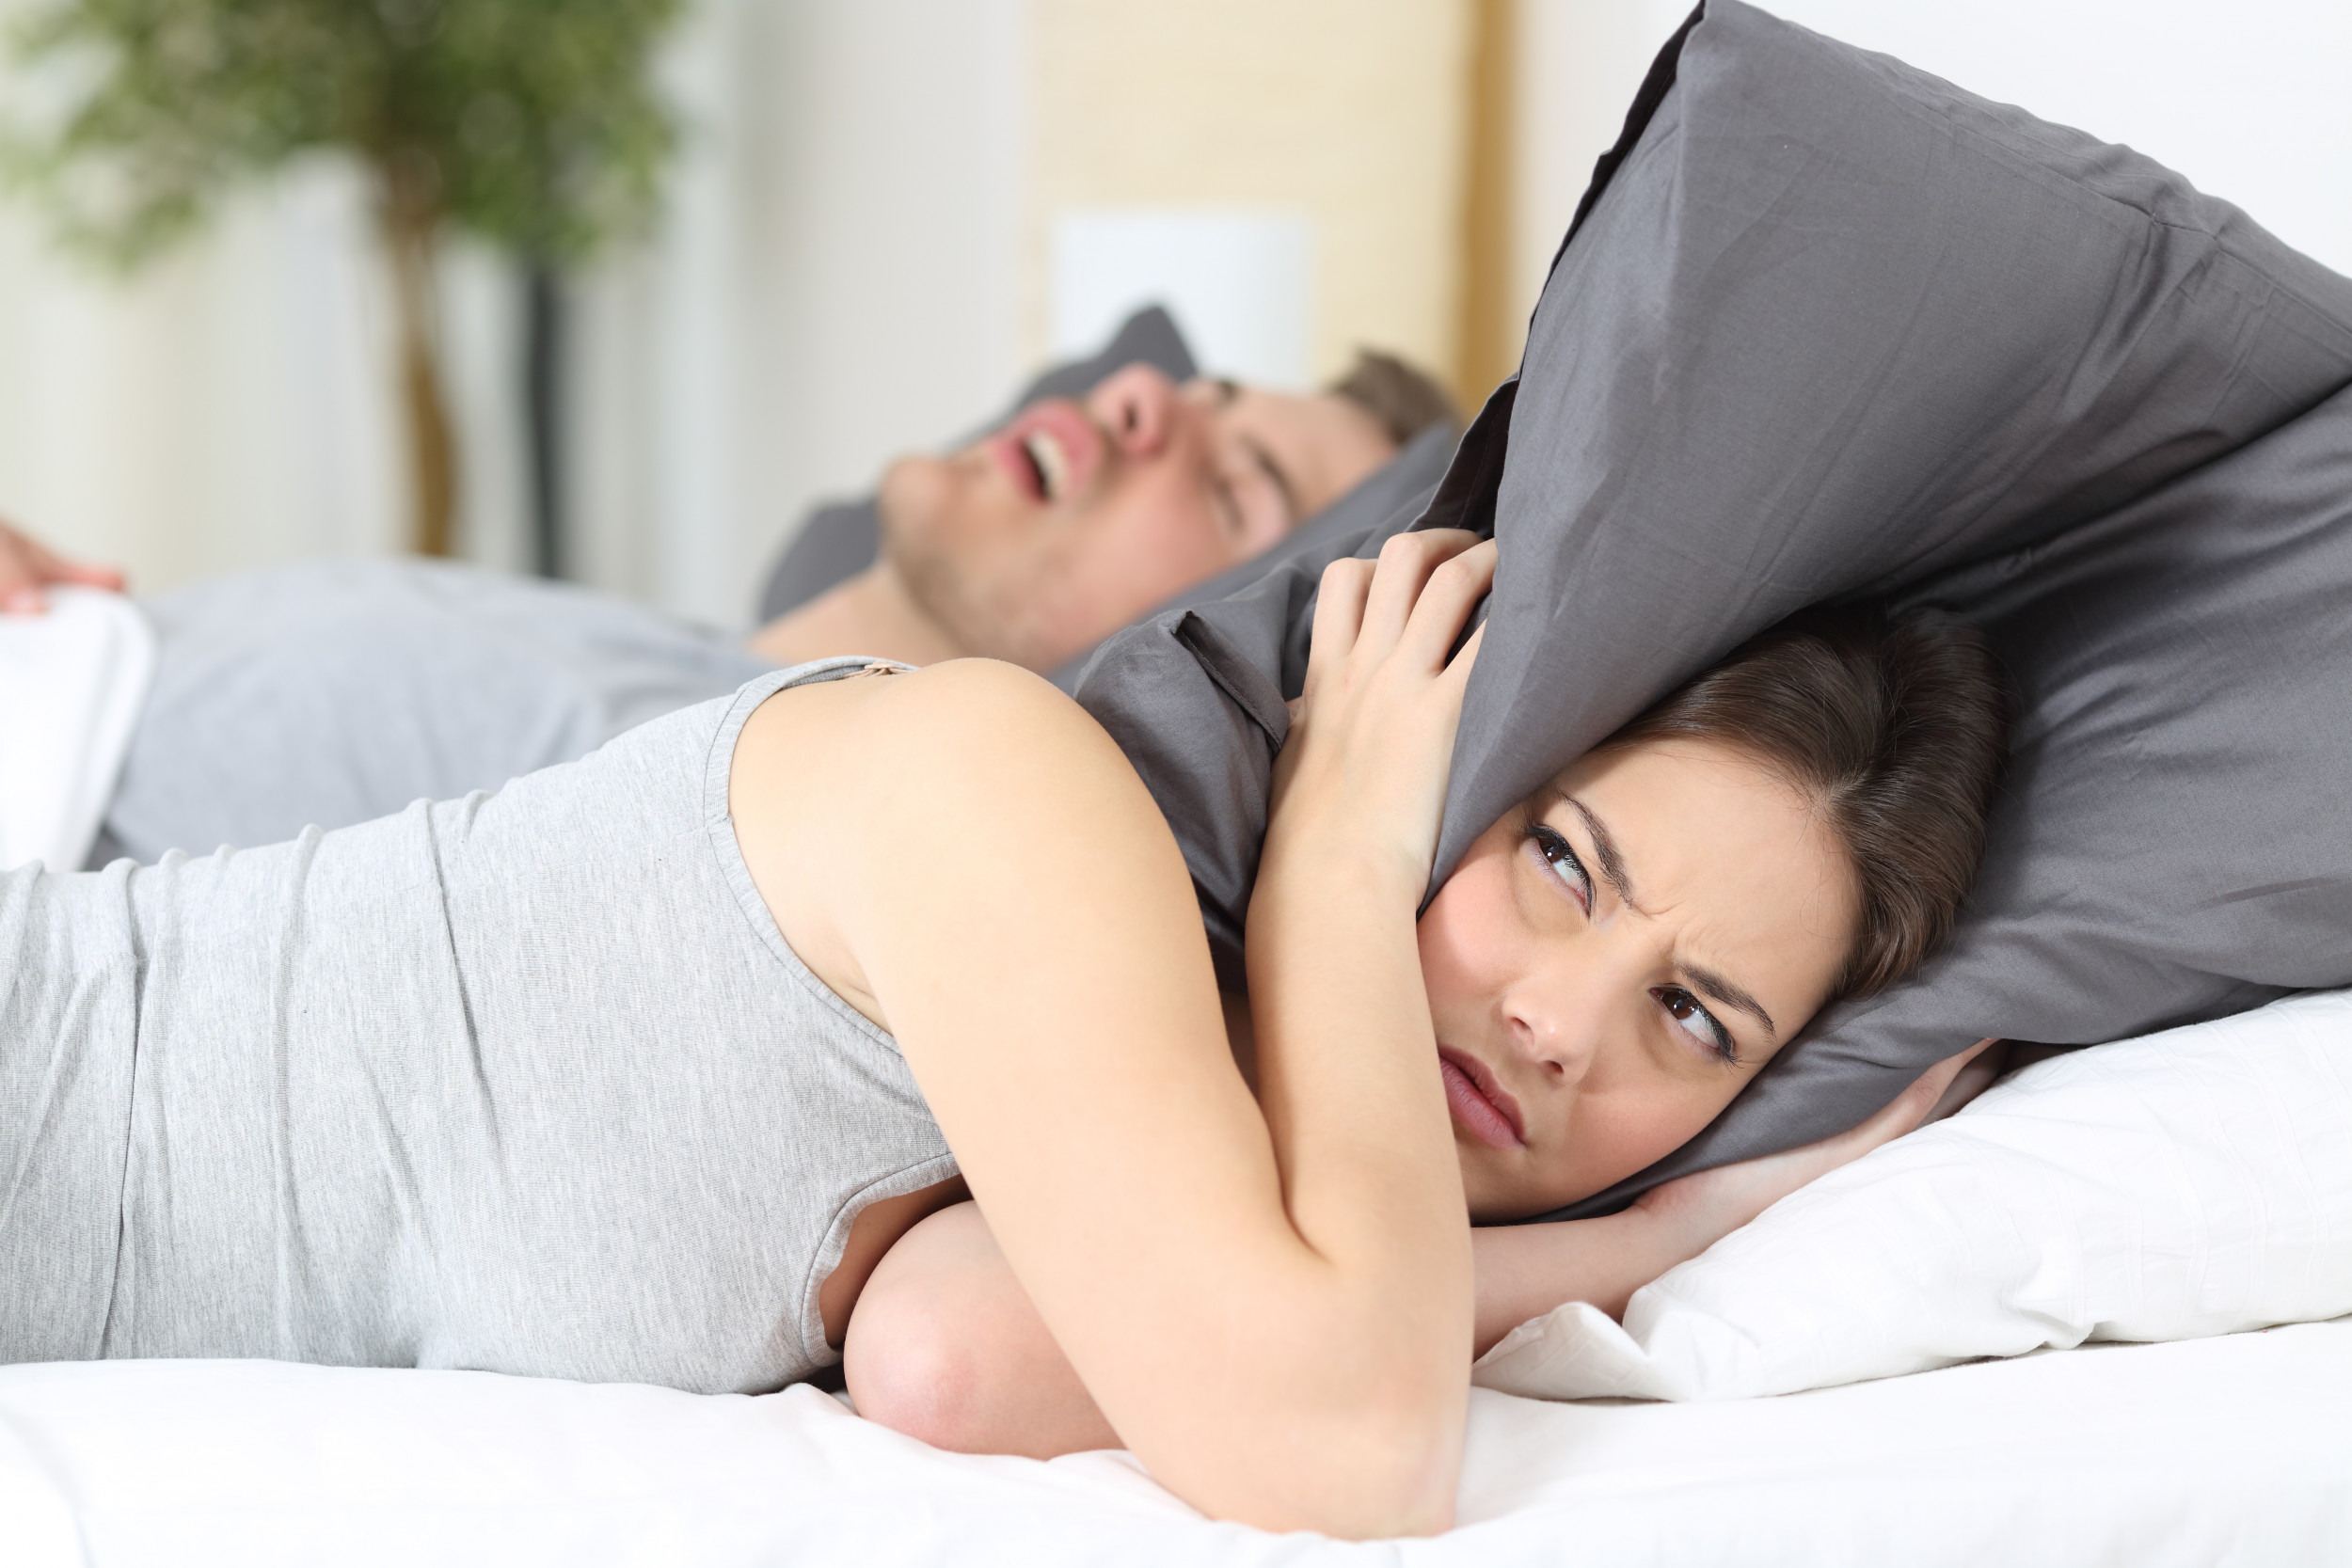 Wife Who Wants to Sleep in Separate Bed From Husband Praised Be Selfish